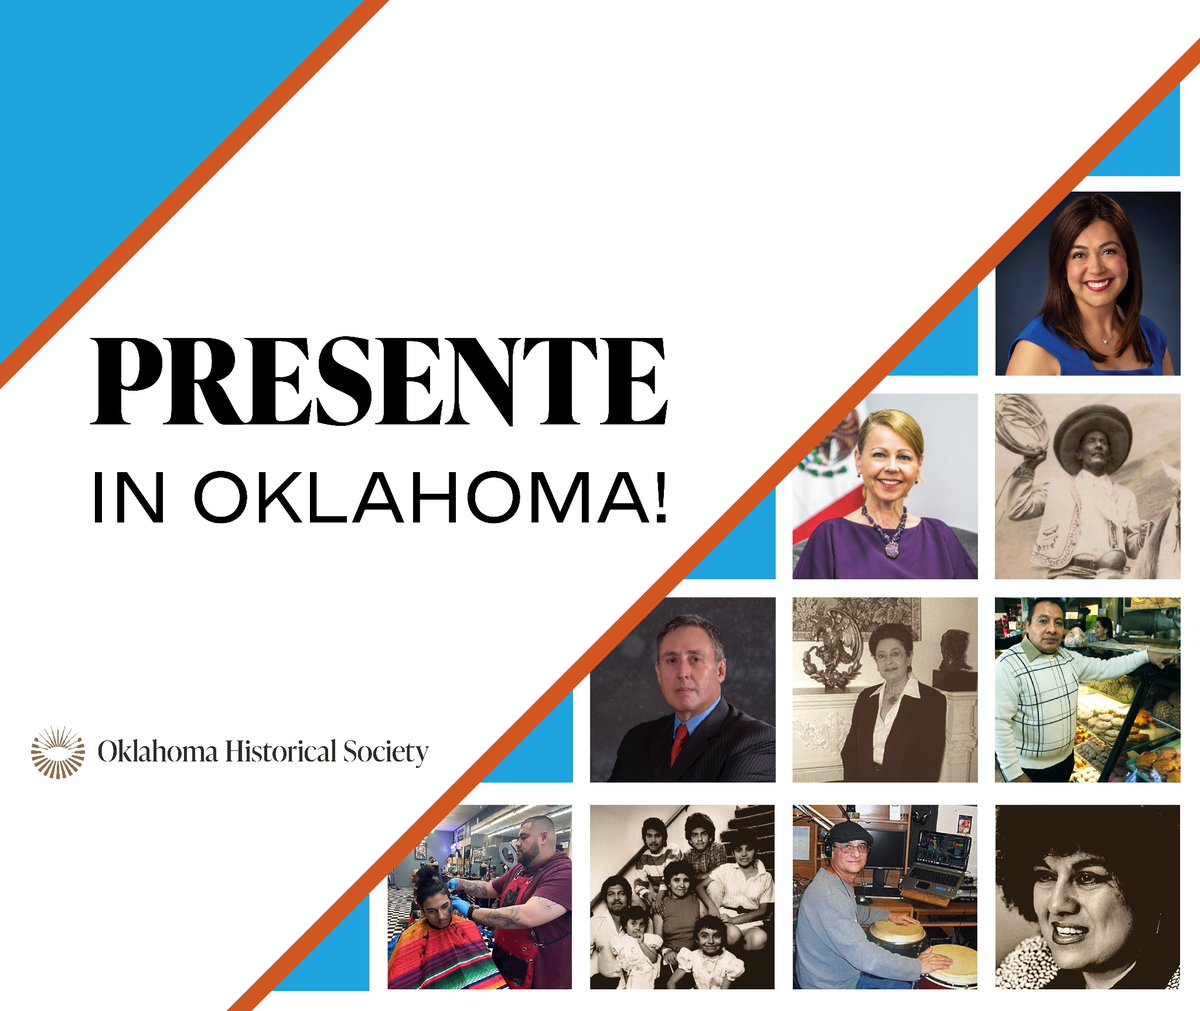 Celebrate #HispanicHeritageMonth with us at “Presente in Oklahoma!” — a free Lunch & Learn event on Tues., Sept. 26, at 11am
📍 OK History Center
Details: facebook.com/events/s/prese…

#SmithsonianHHM